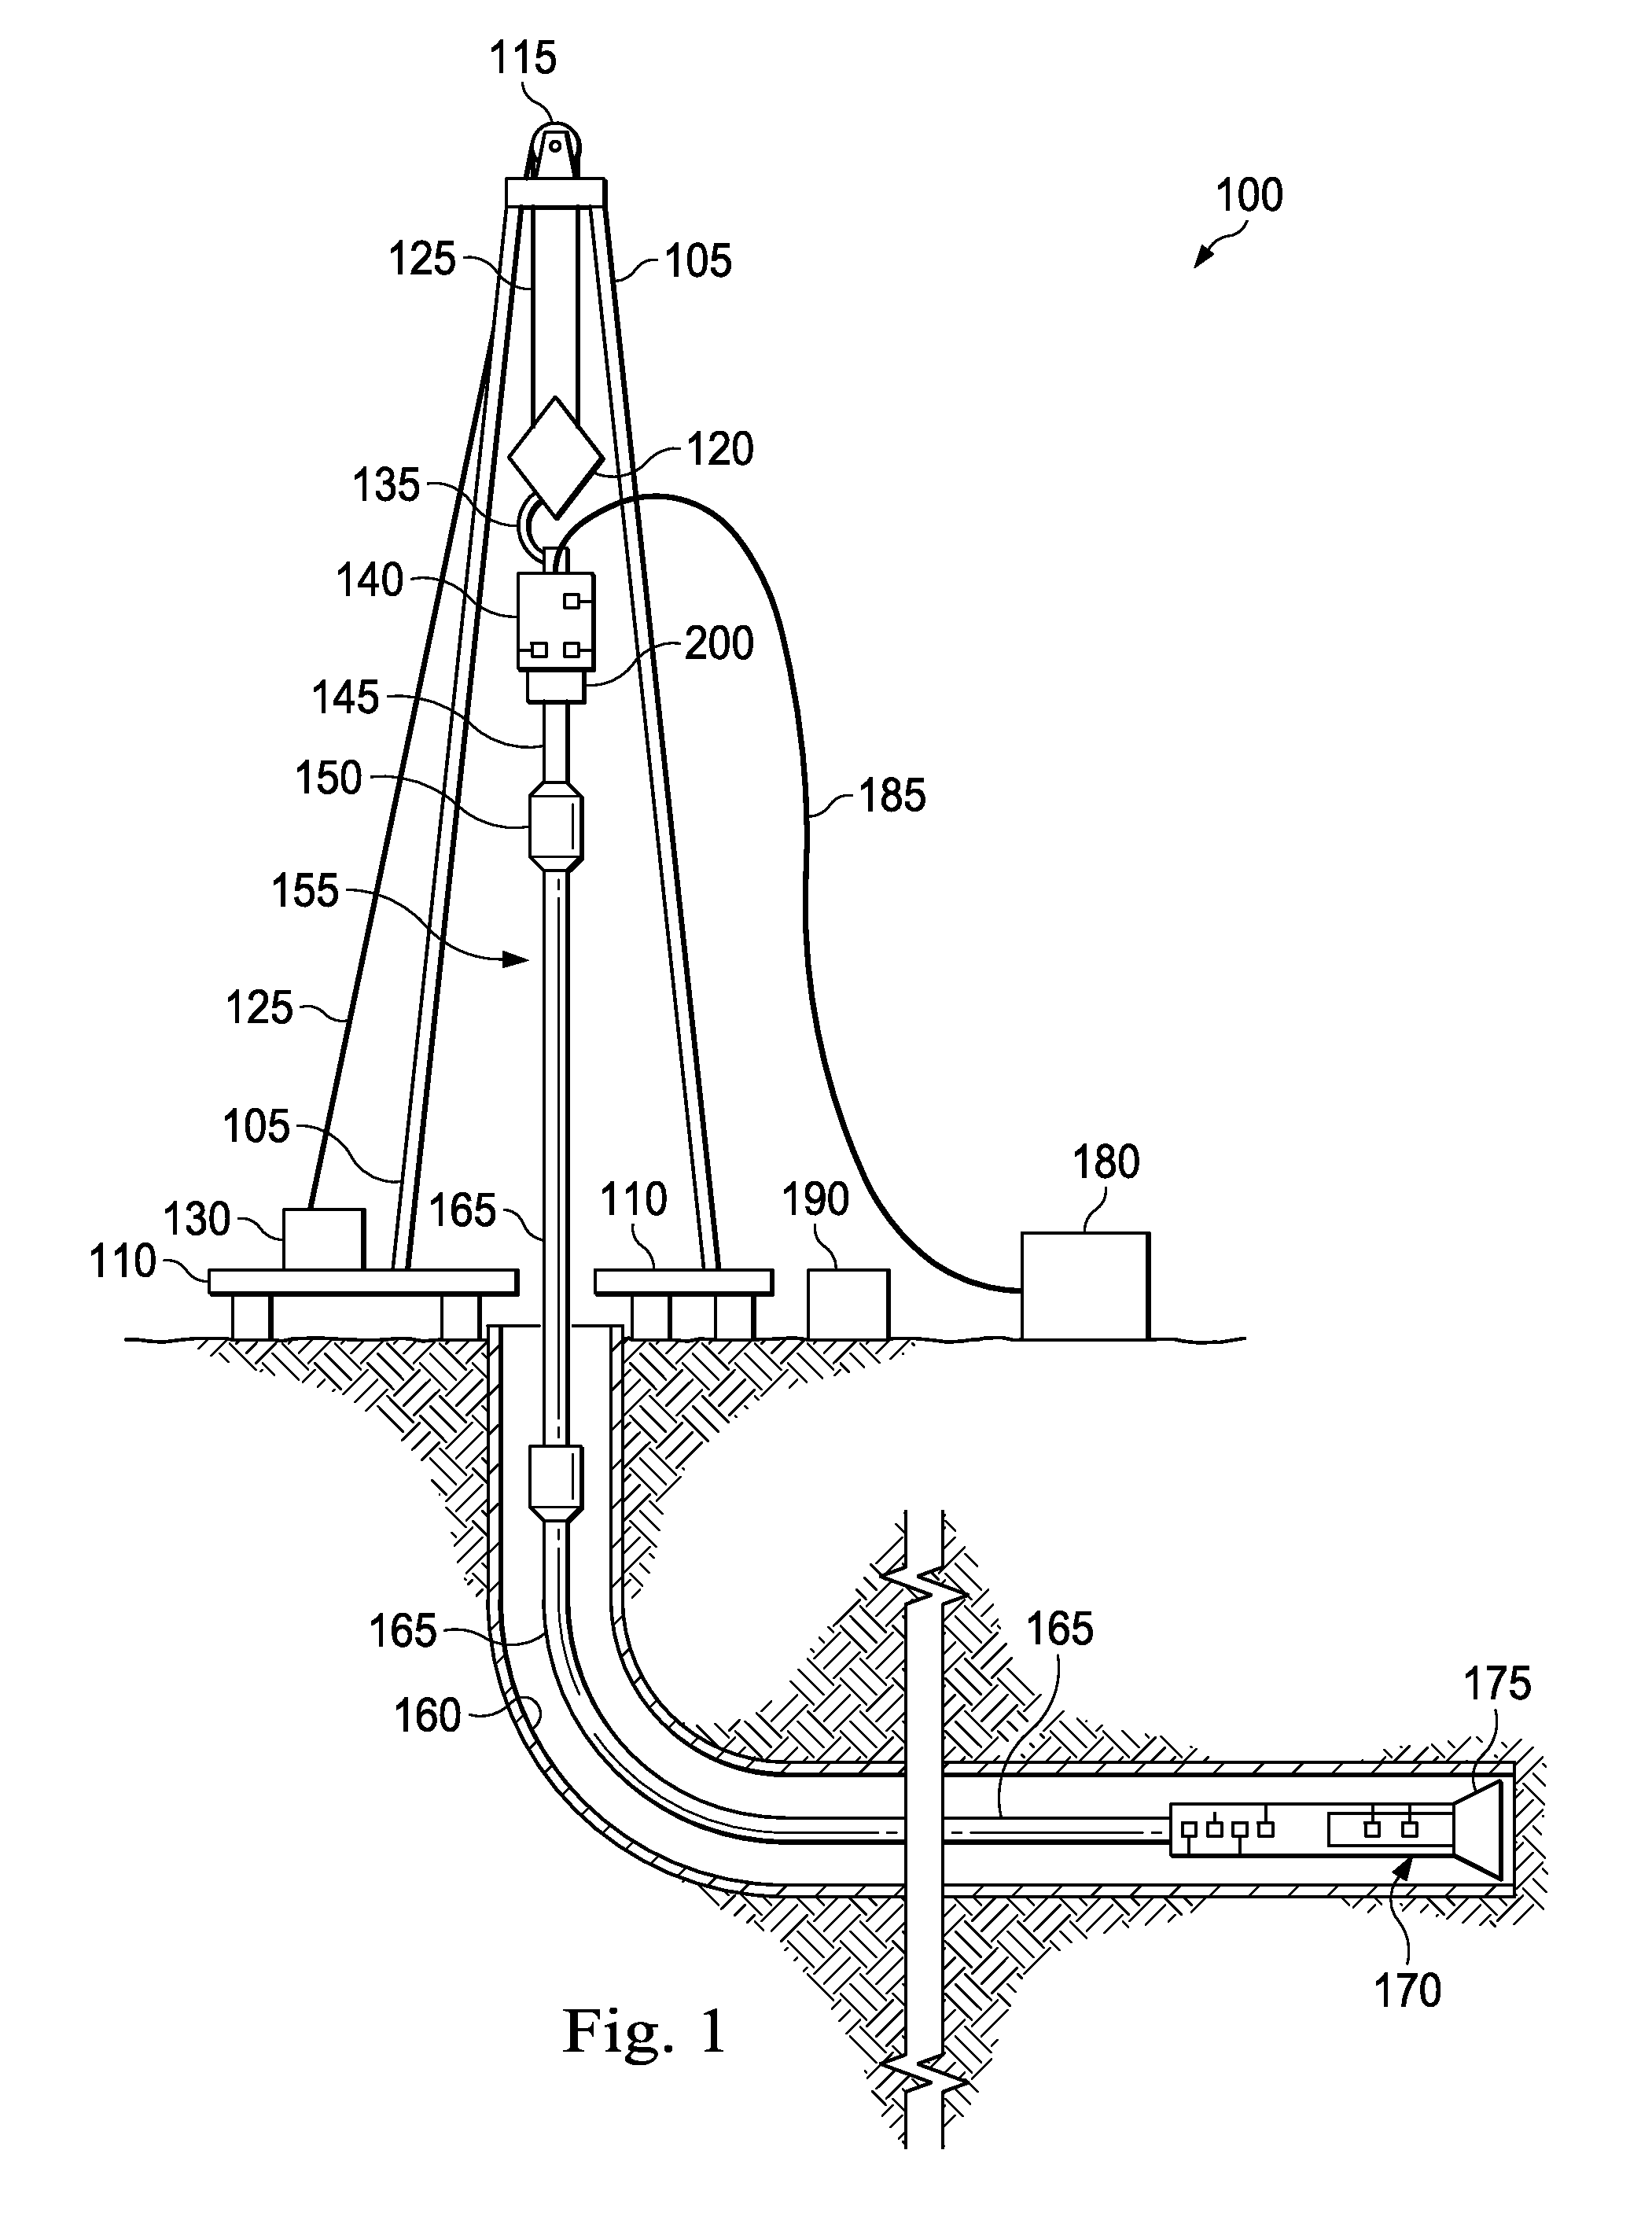 Drill string with aluminum drill pipes, bent housing, and motor